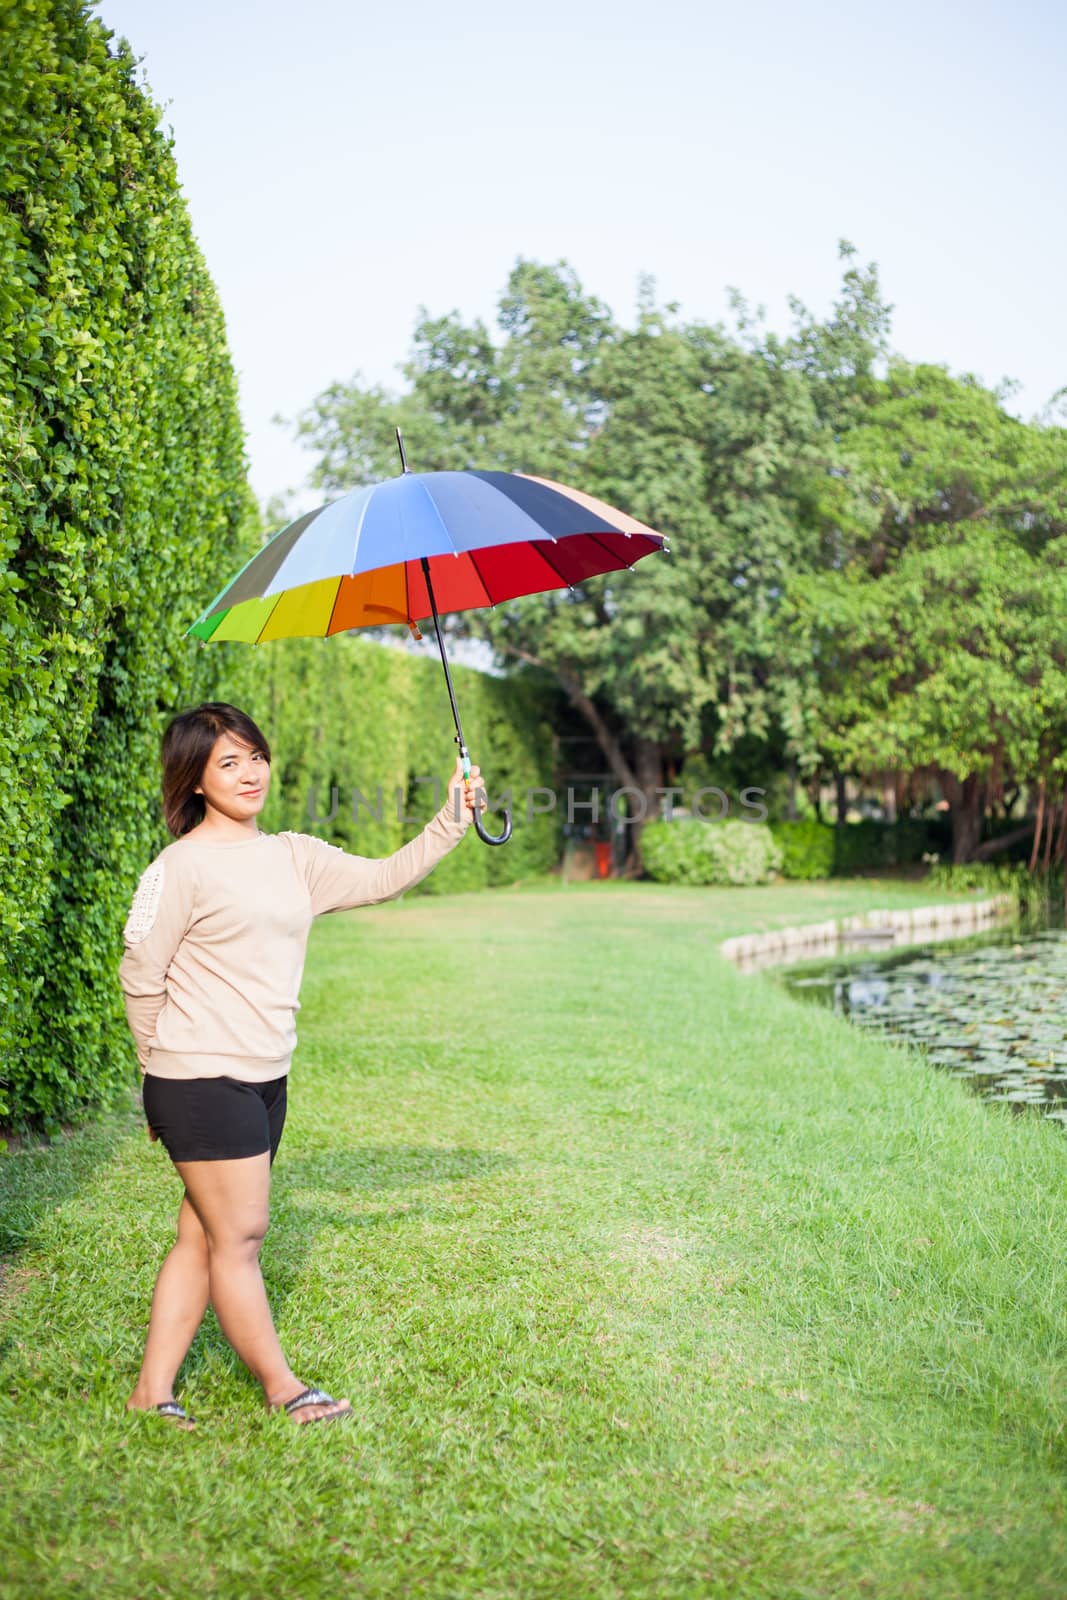 Asian woman holding an umbrella in the park. Stood on the lawn beside a tree.